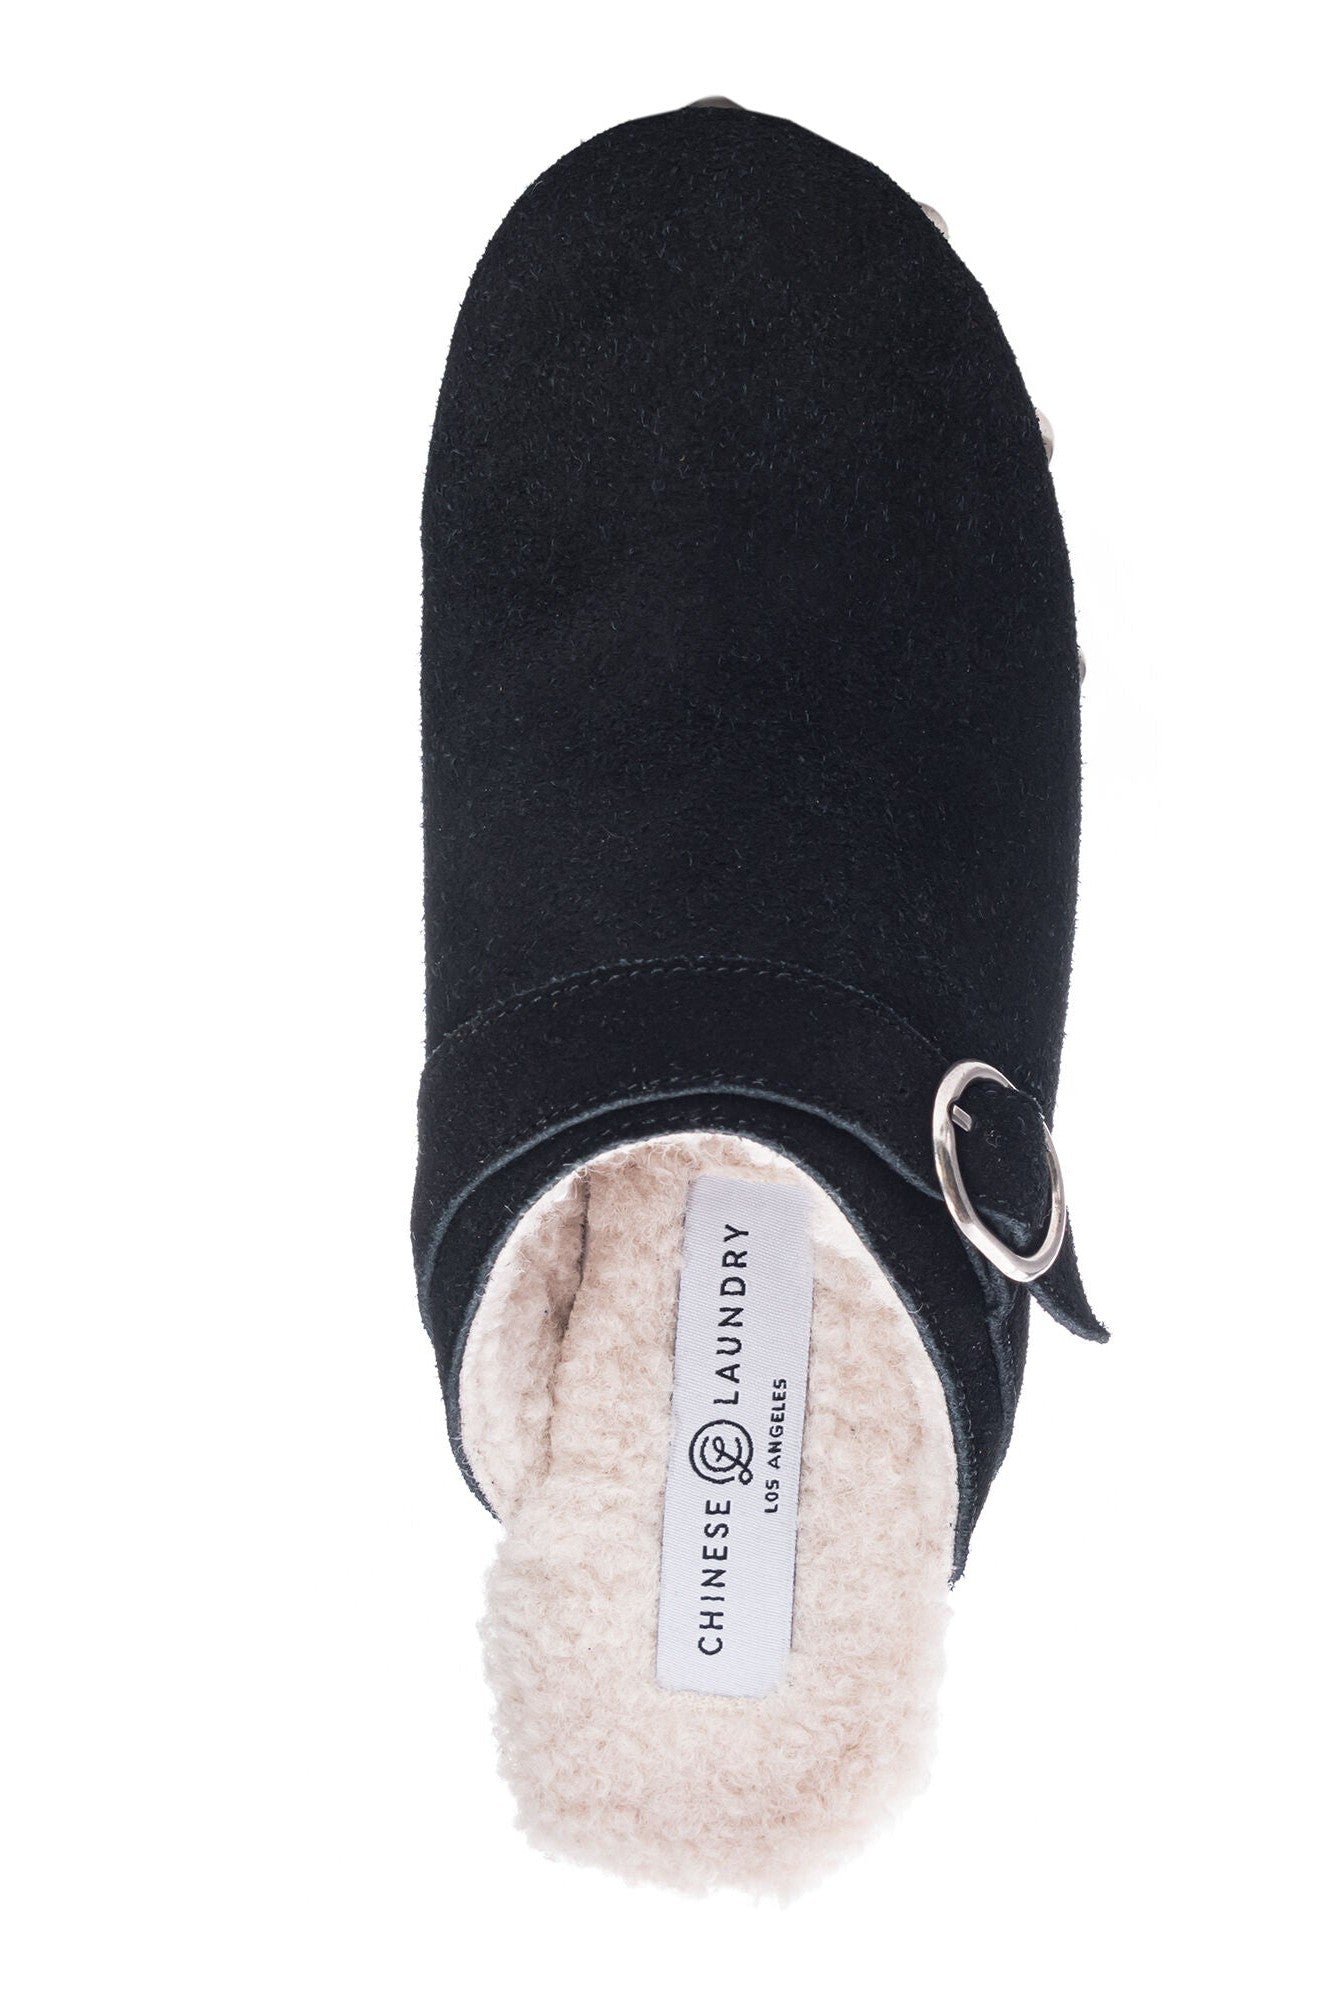 Chinese Laundry - Carlie Suede Clog - Black